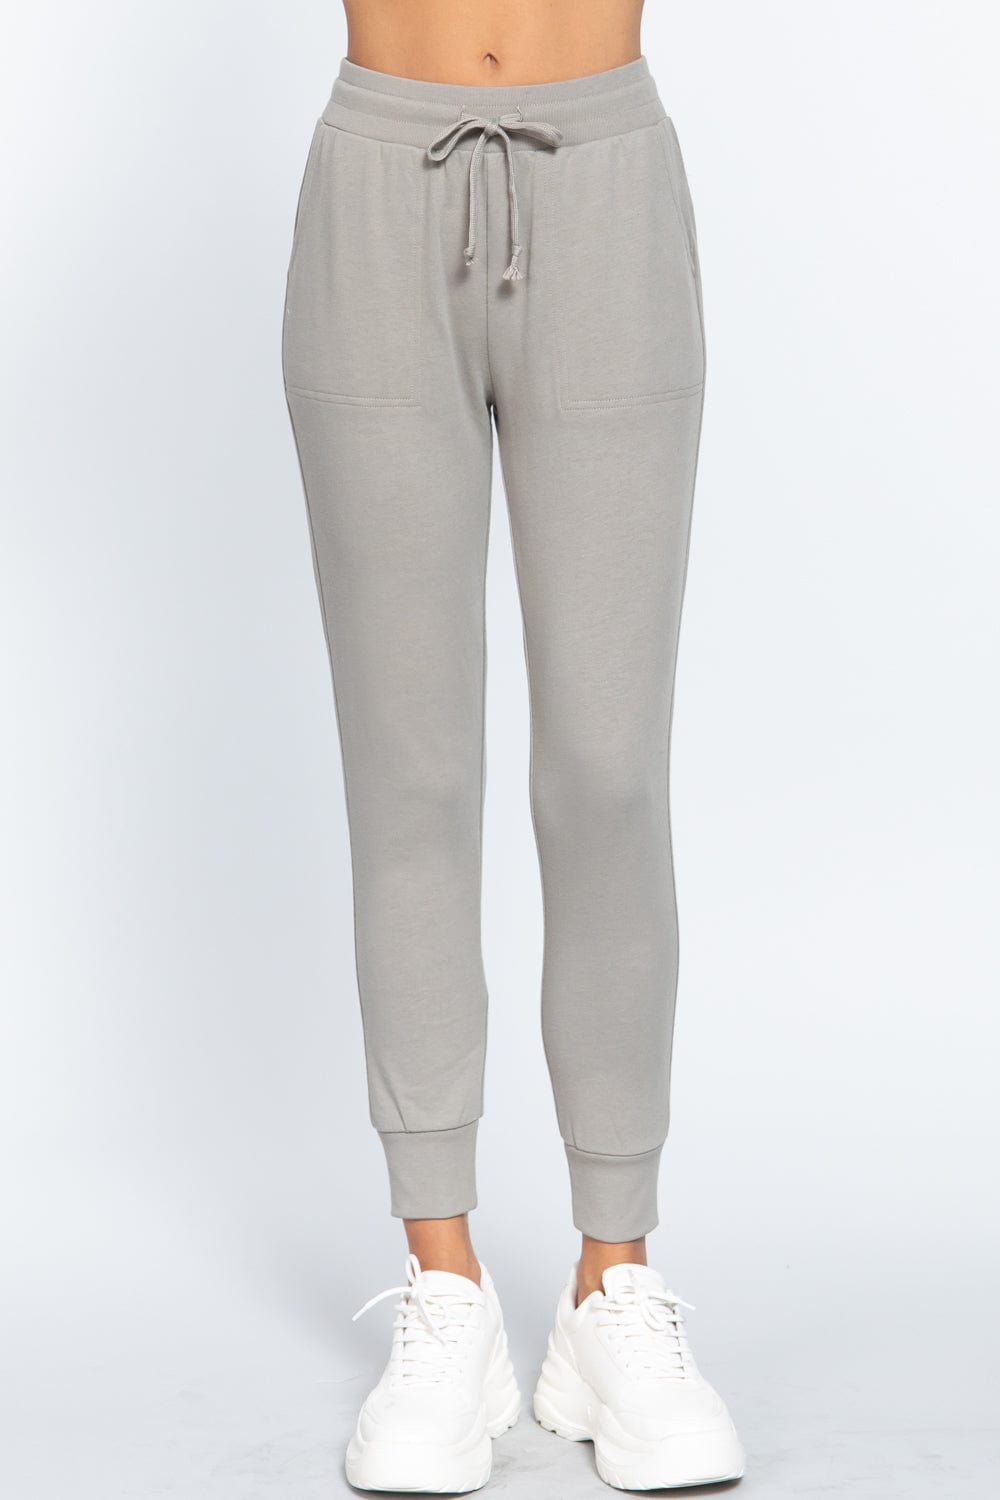 The802Gypsy  bottoms/sweatpants Oyster Sage / L ♥GYPSY LOVE-Waist Band Sweatpants With Pockets